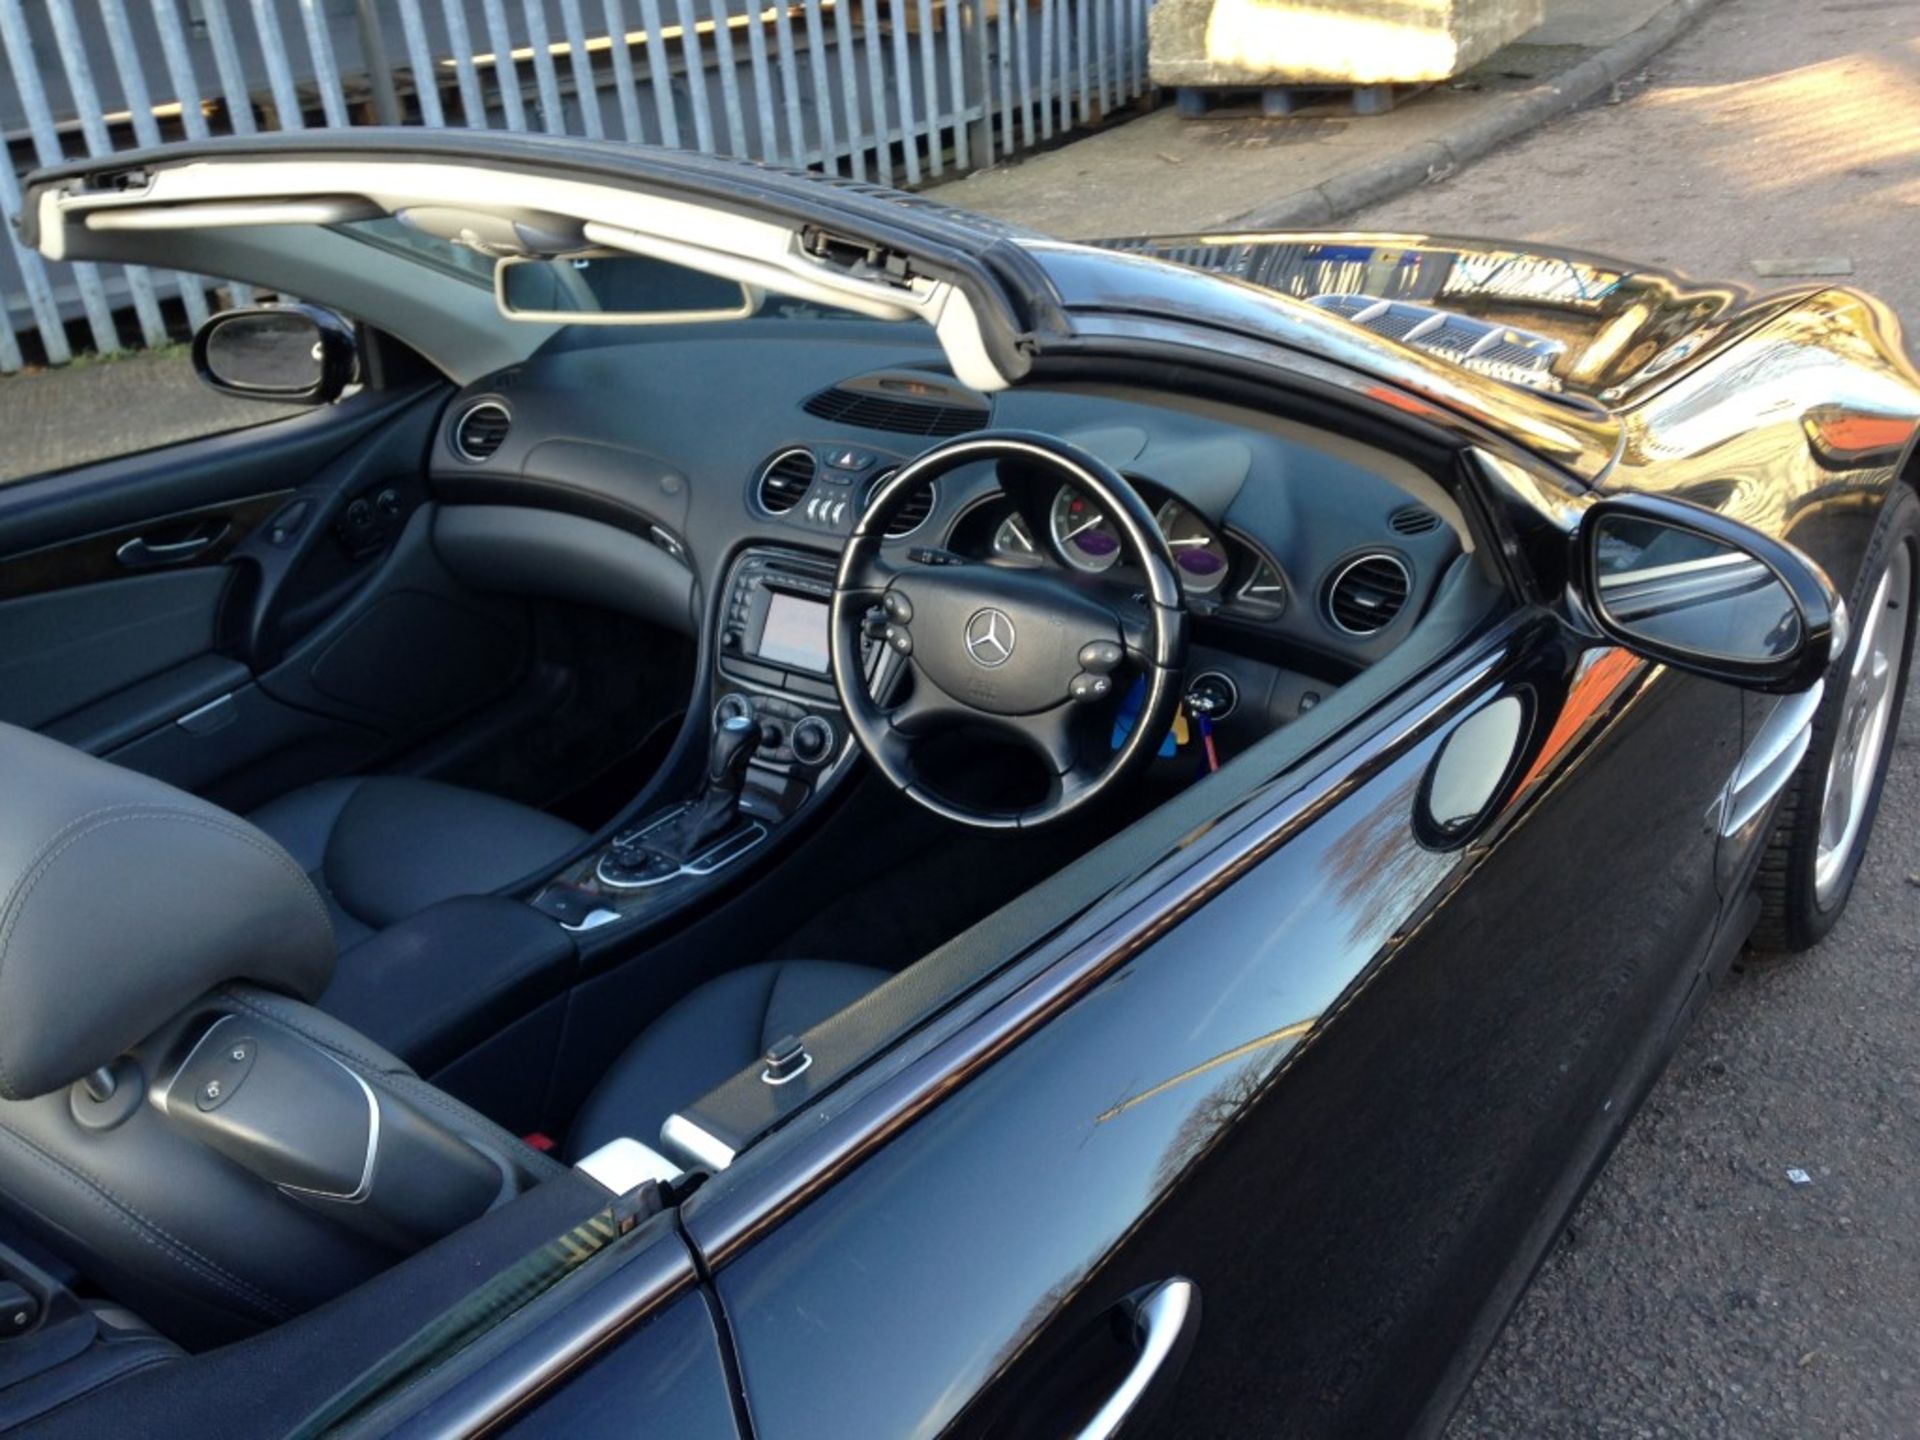 1 x Mercedes SL500 Automatic 5.0 Convertible - Petrol - Year 2002 - 94,500 Miles - Long MOT Expiry - Image 37 of 48